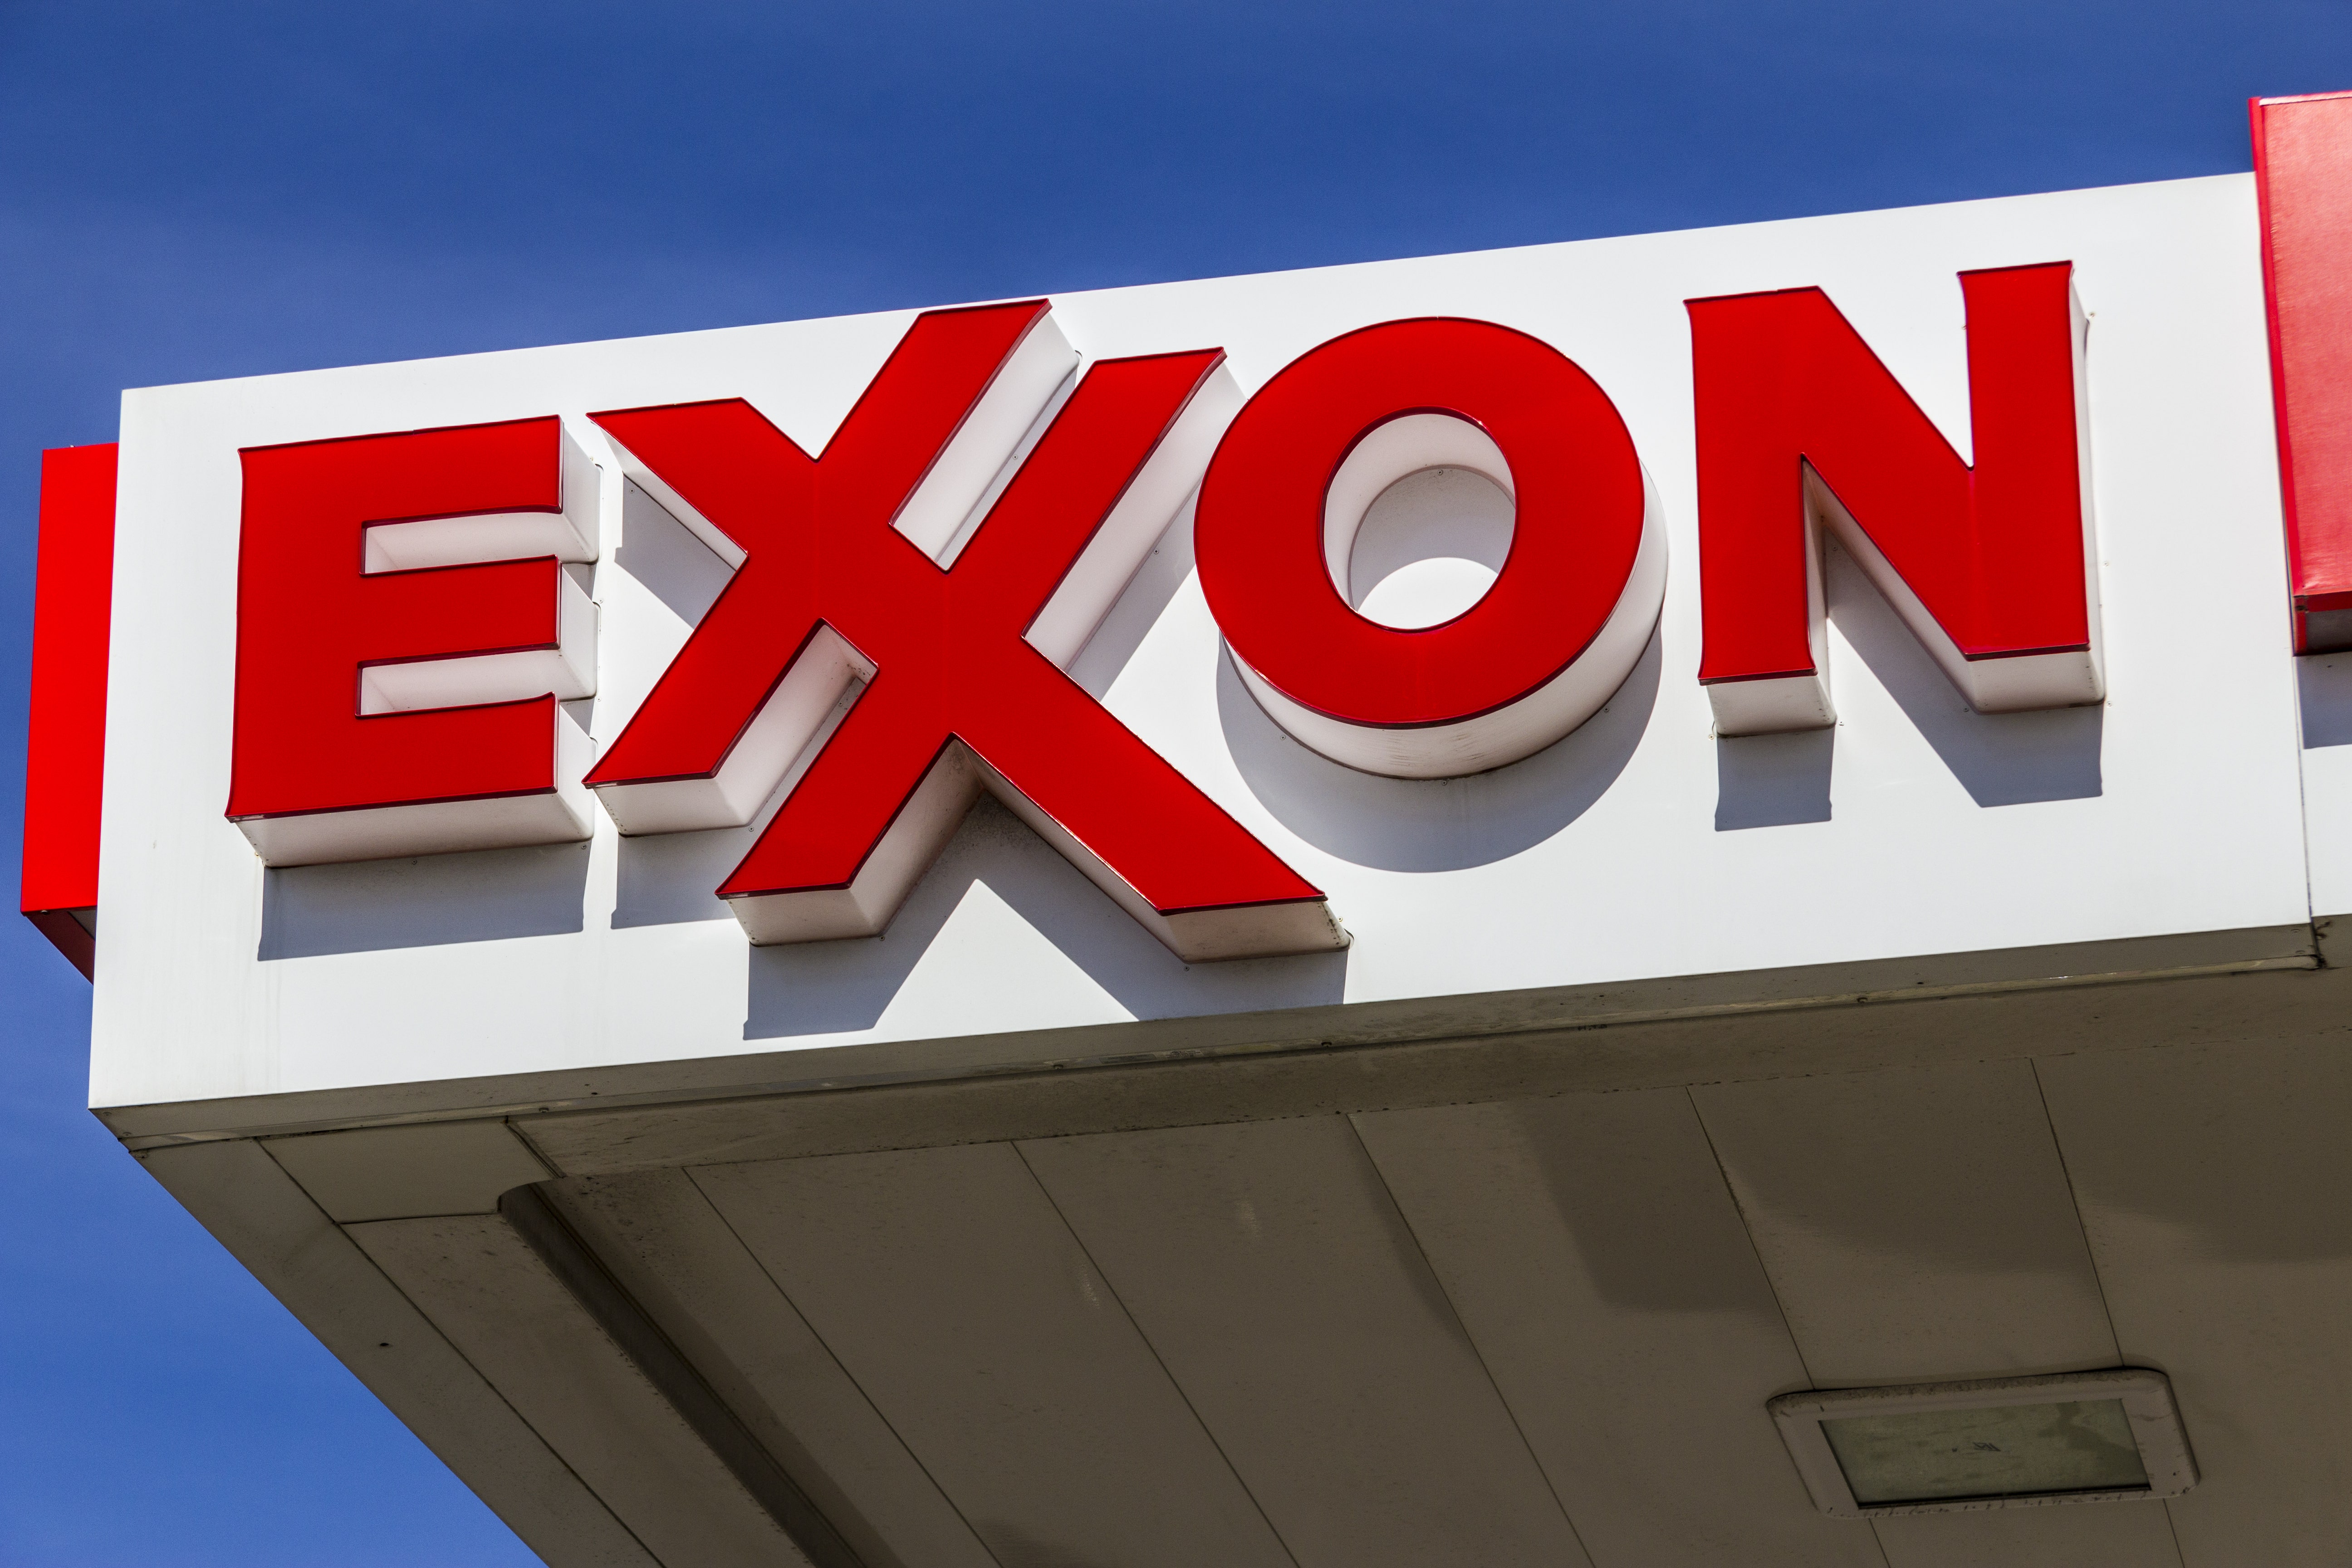 Exxon Exits Russia Completely After Putin Seizes Company's Properties: Report